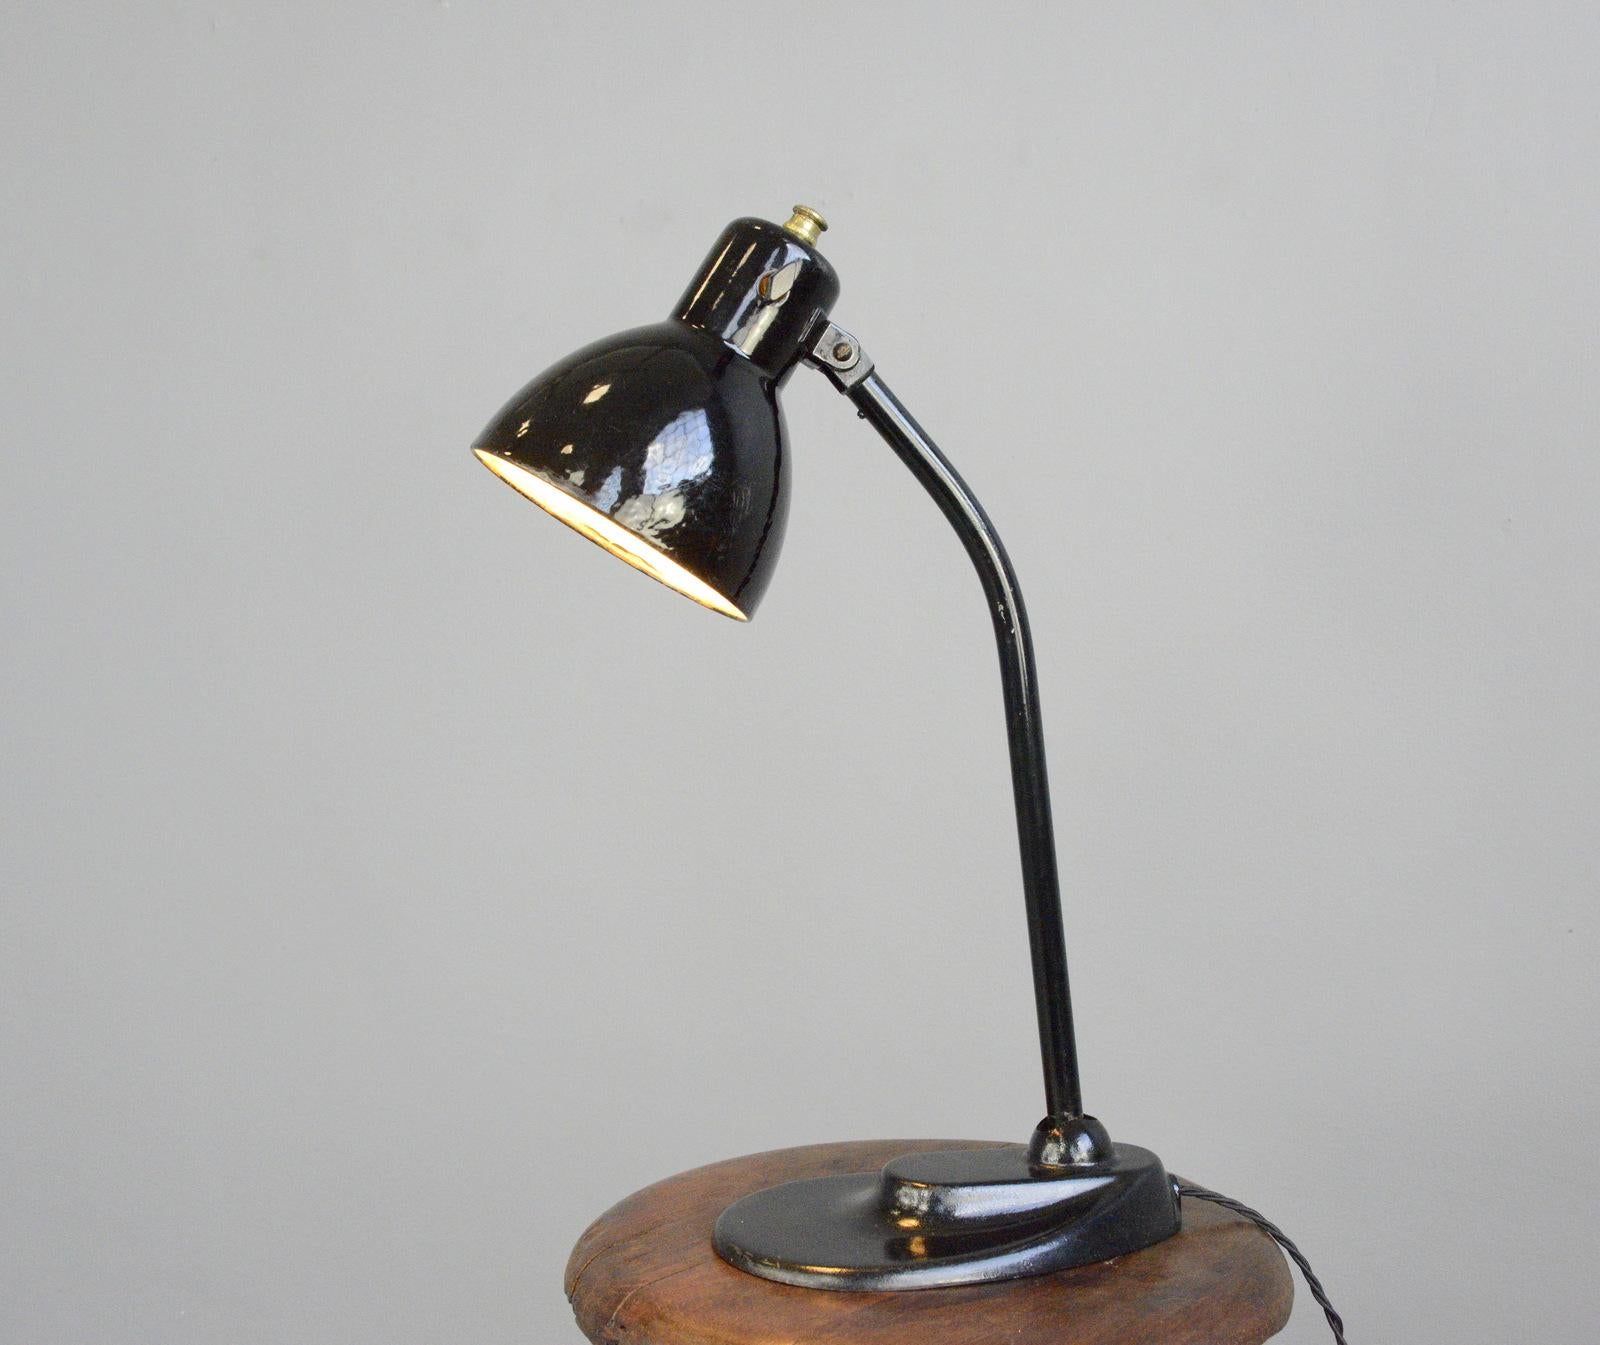 Model 752 table lamp by Kandem, circa 1930s.

- Vitreous black enamel shade
- Cast iron foot with curved steel arm
- Adjustable shade and arm
- Original bakelite On/Off toggle switch
- Takes E27 fitting bulbs
- Designed by Hin Bredendieck &